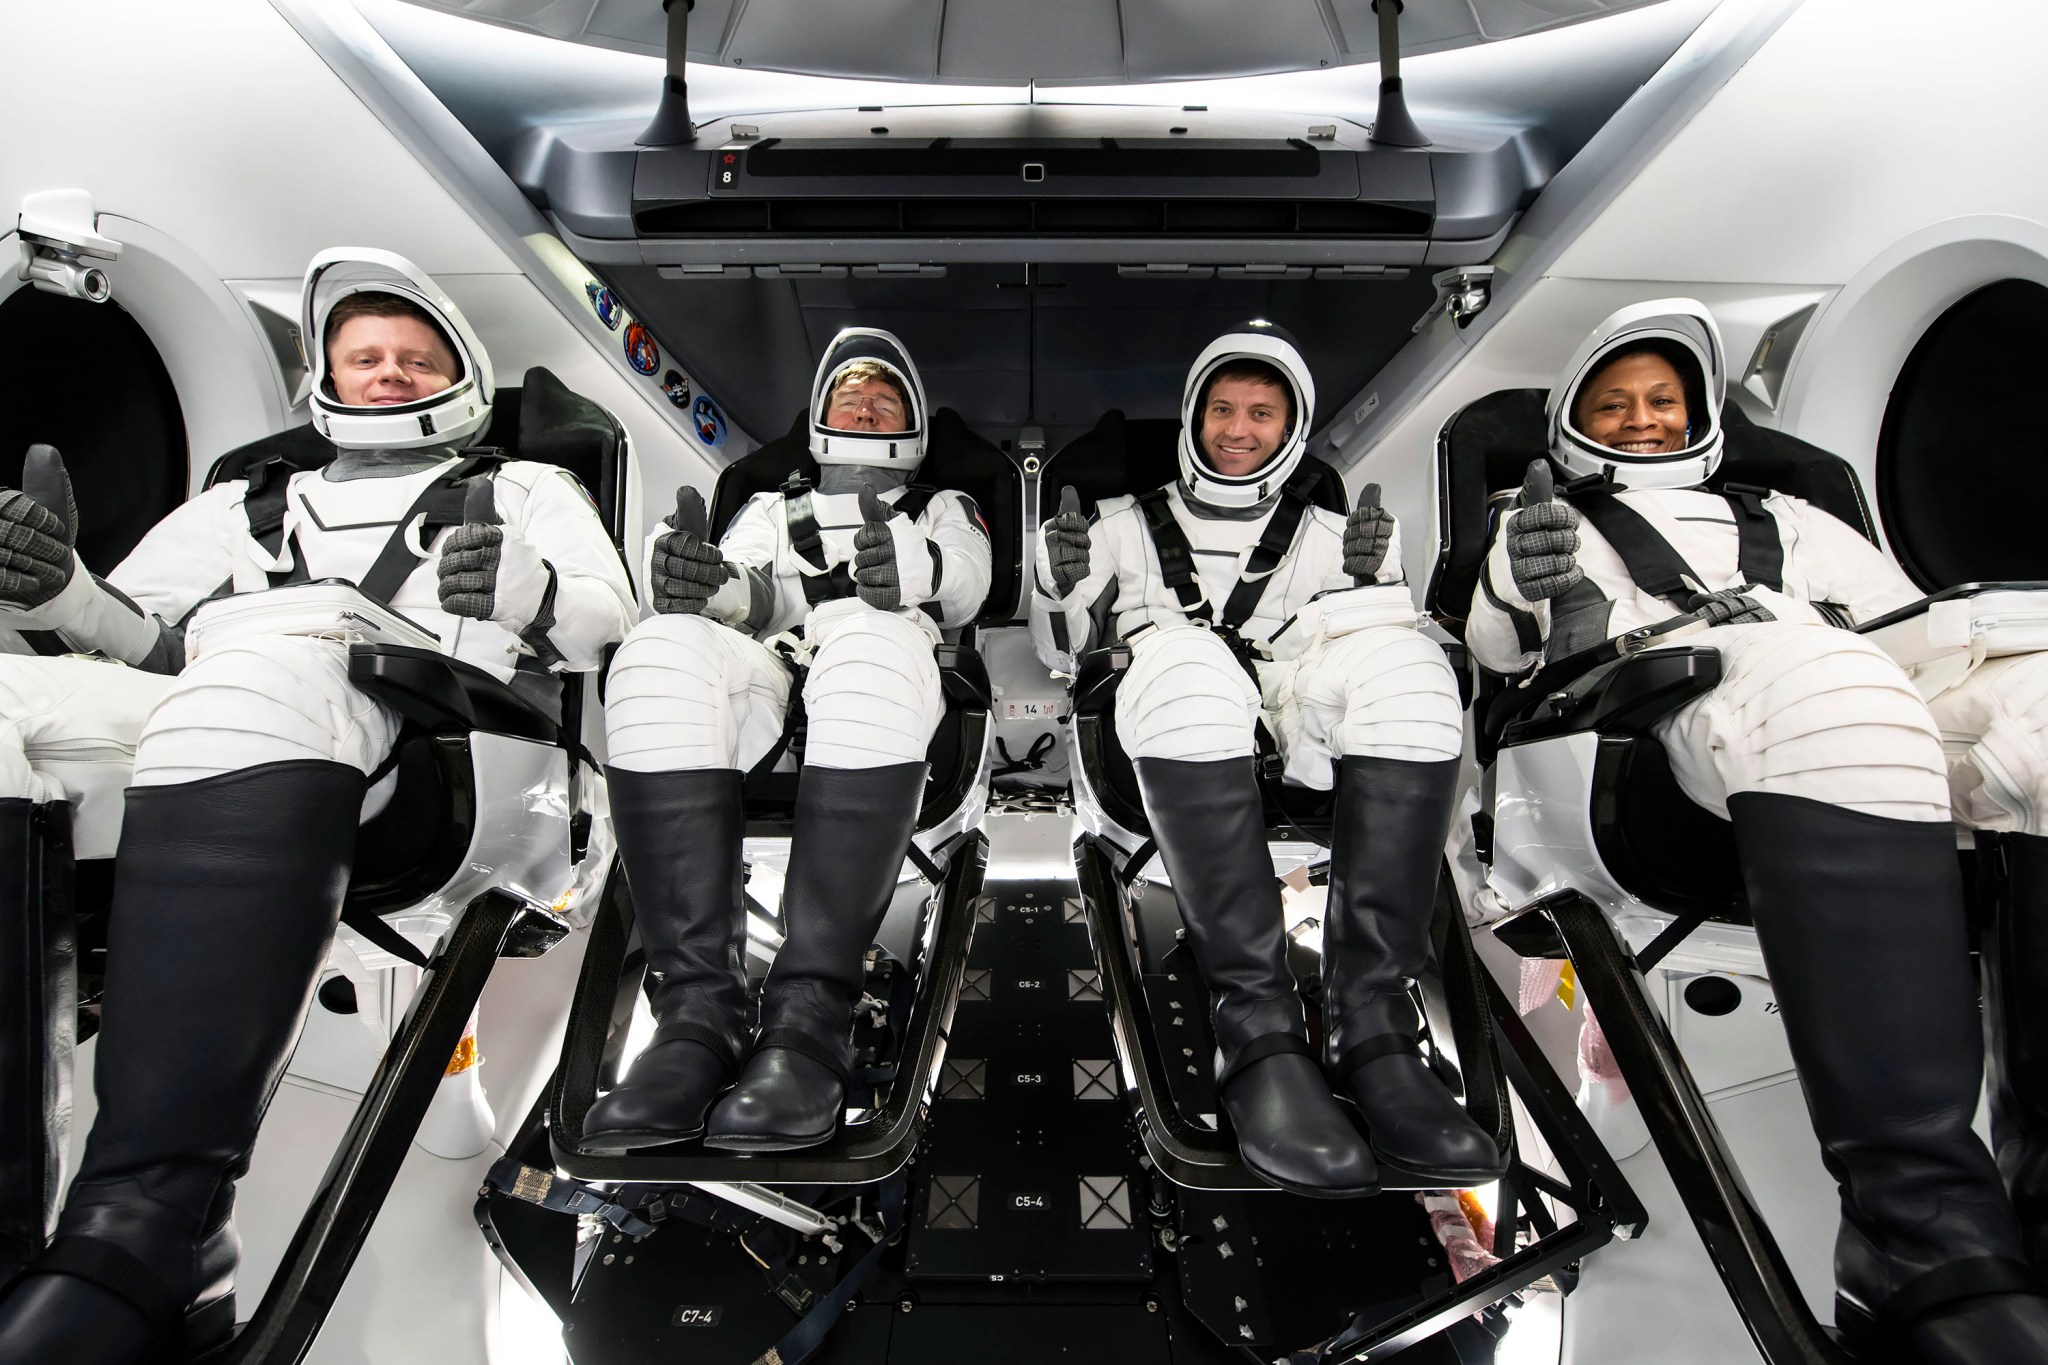 The crew of NASA’s SpaceX Crew-8 mission to the International Space Station poses for a photo during their Crew Equipment Interface Test at NASA’s Kennedy Space Center in Florida. The goal of the training is to rehearse launch day activities and get a close look at the spacecraft that will take them to the International Space Station.